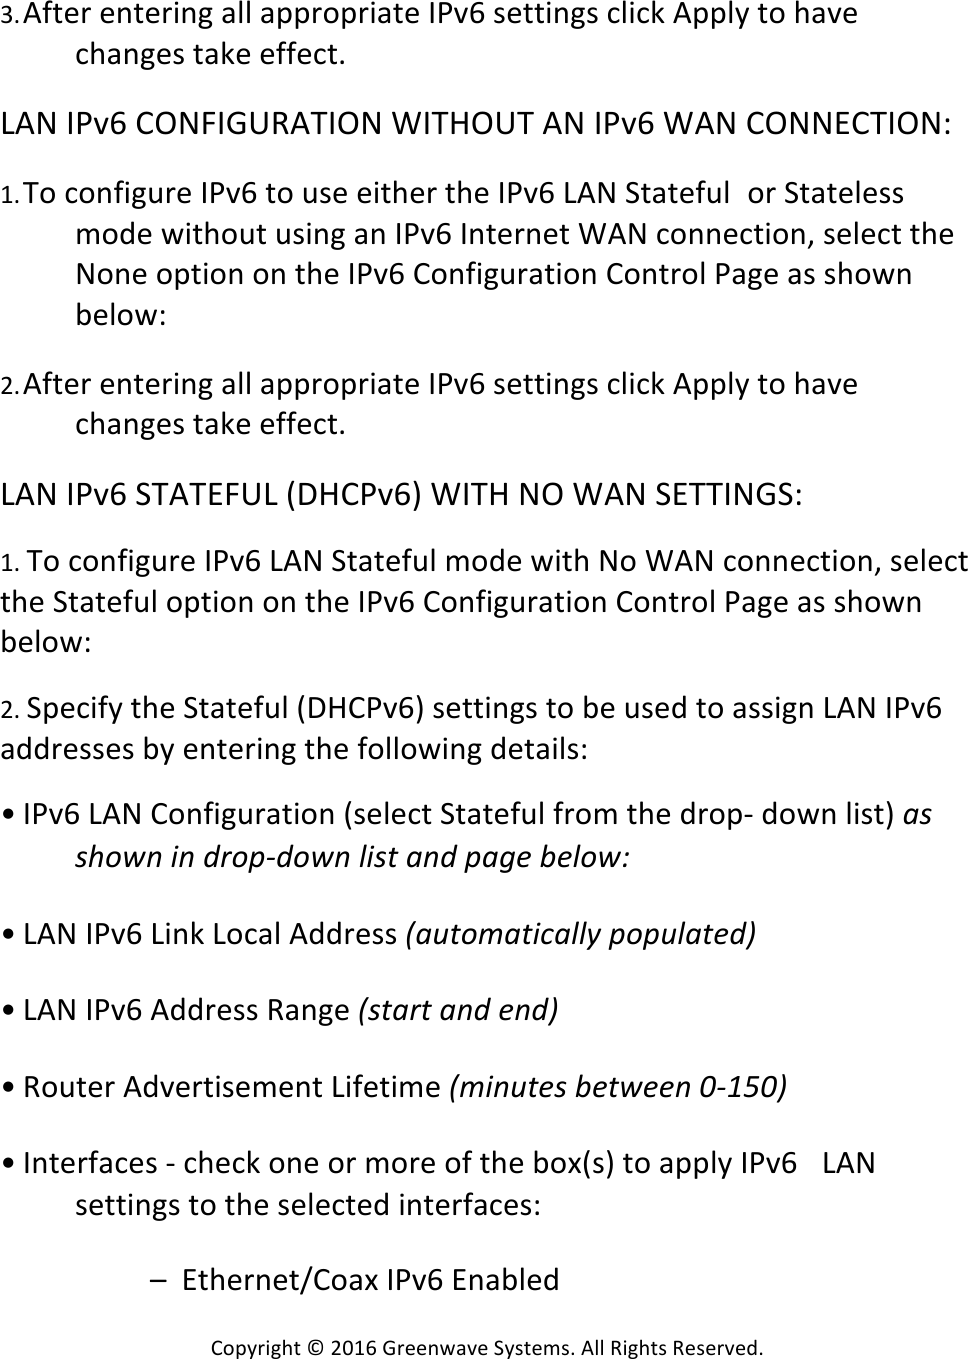 Copyright*©*2016*Greenwave*Systems.*All*Rights*Reserved.**3. After*entering*all*appropriate*IPv6*settings*click*Apply*to*have*changes*take*effect.* *LAN*IPv6*CONFIGURATION*WITHOUT*AN*IPv6*WAN*CONNECTION:**1. To*configure*IPv6*to*use*either*the*IPv6*LAN*Stateful or*Stateless*mode*without*using*an*IPv6*Internet*WAN*connection,*select*the*None*option*on*the*IPv6*Configuration*Control*Page*as*shown*below:* *2. After*entering*all*appropriate*IPv6*settings*click*Apply*to*have*changes*take*effect.* *LAN*IPv6*STATEFUL*(DHCPv6)*WITH*NO*WAN*SETTINGS:**1.*To*configure*IPv6*LAN*Stateful*mode*with*No*WAN*connection,*select*the*Stateful*option*on*the*IPv6*Configuration*Control*Page*as*shown*below:**2.*Specify*the*Stateful*(DHCPv6)*settings*to*be*used*to*assign*LAN*IPv6*addresses*by*entering*the*following*details:**• IPv6*LAN*Configuration*(select*Stateful*from*the*drop-*down*list)*&apos;A!AQ9*@!#@!D;9&lt;ZD9*@!G#A(!&apos;@D!&lt;&apos;?)!L)G9*B! *• LAN*IPv6*Link*Local*Address*]&apos;:(9C&apos;(#=&apos;GG+!&lt;9&lt;:G&apos;()D^! *• LAN*IPv6*Address*Range*]A(&apos;;(!&apos;@D!)@D^! *• Router*Advertisement*Lifetime*]C#@:()A!L)(*))@!,Z-2,^! *• Interfaces*-*check*one*or*more*of*the*box(s)*to*apply*IPv6* LAN*settings*to*the*selected*interfaces:*** * –**Ethernet/Coax*IPv6*Enabled* *